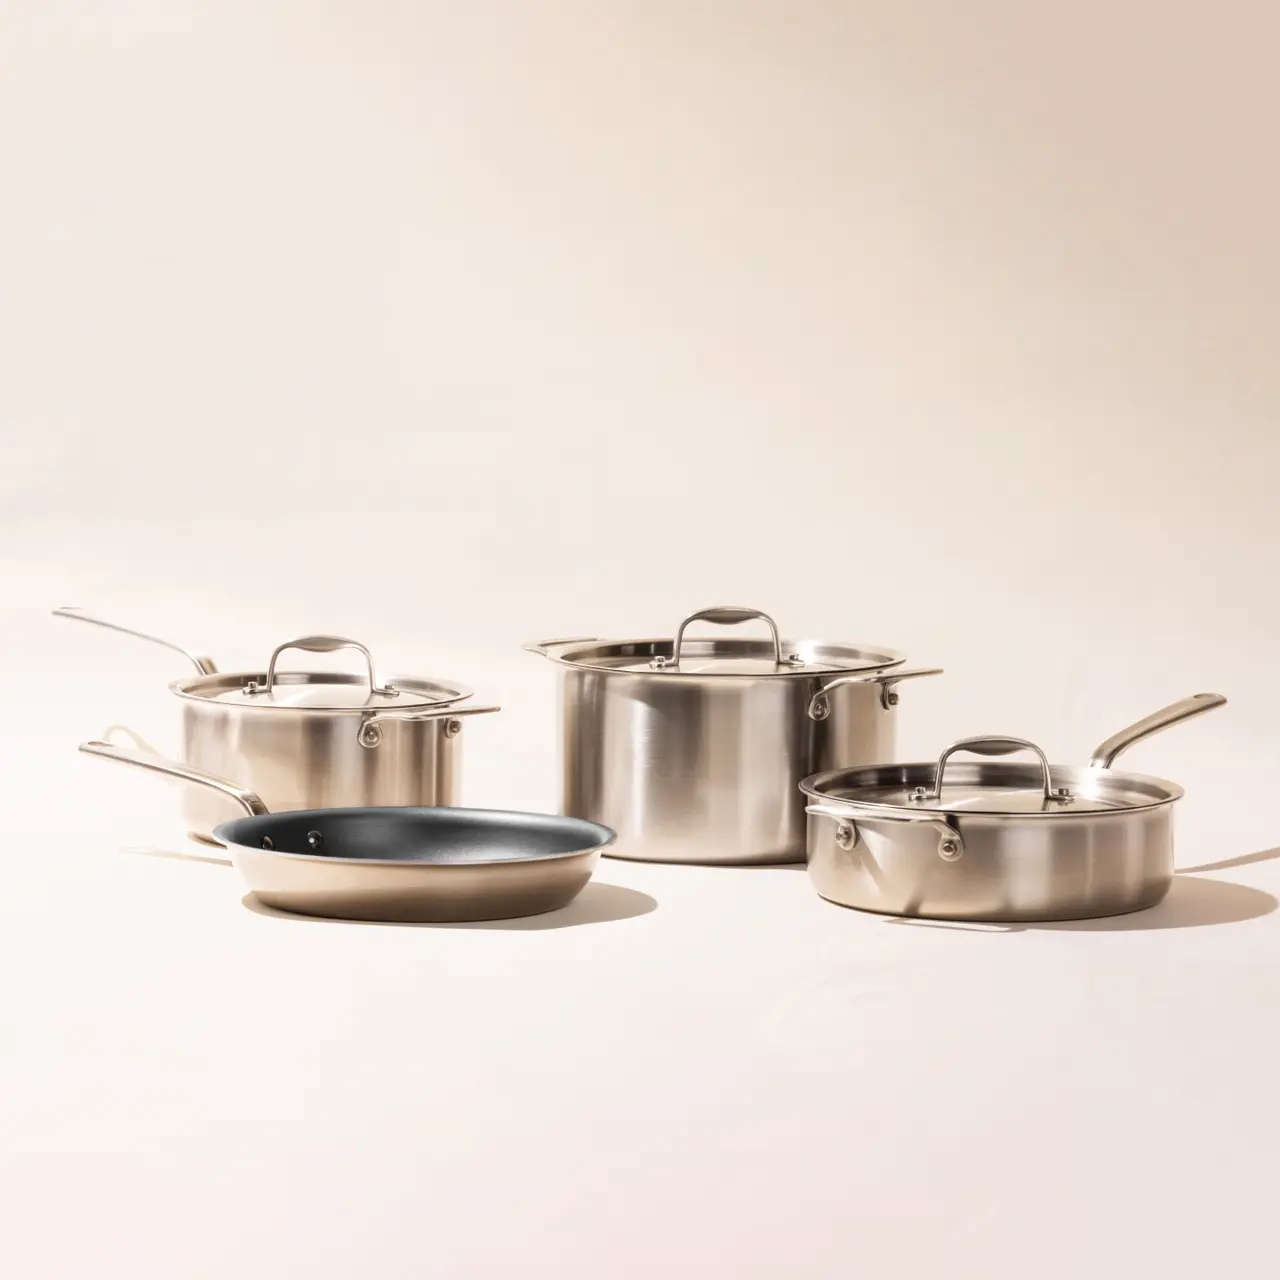 A set of stainless steel cookware, including pots and a pan, is neatly arranged on a light background.